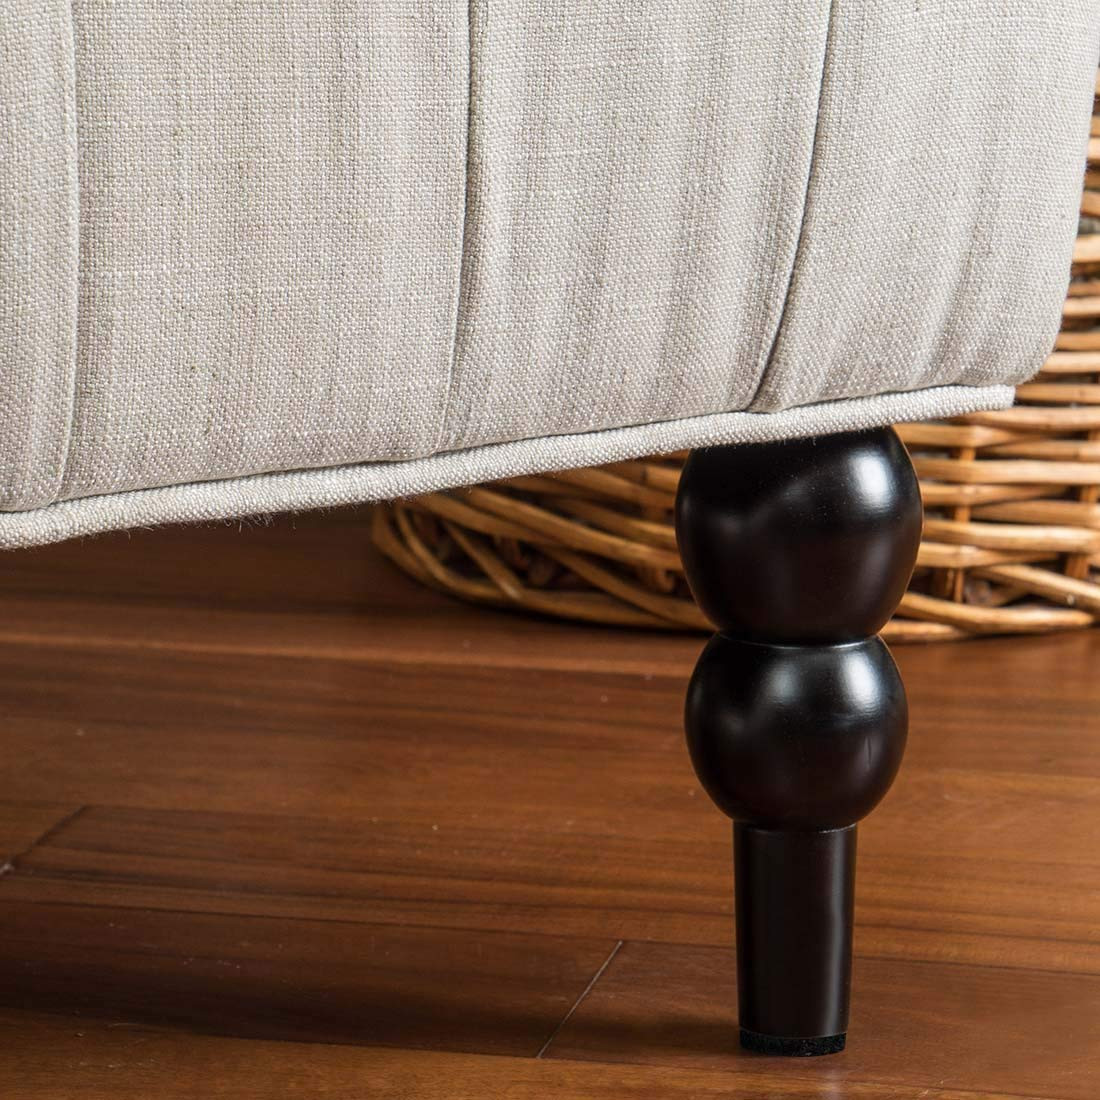 17 Fantastic Hardwood Floor Protectors For Dining Chairs Unique